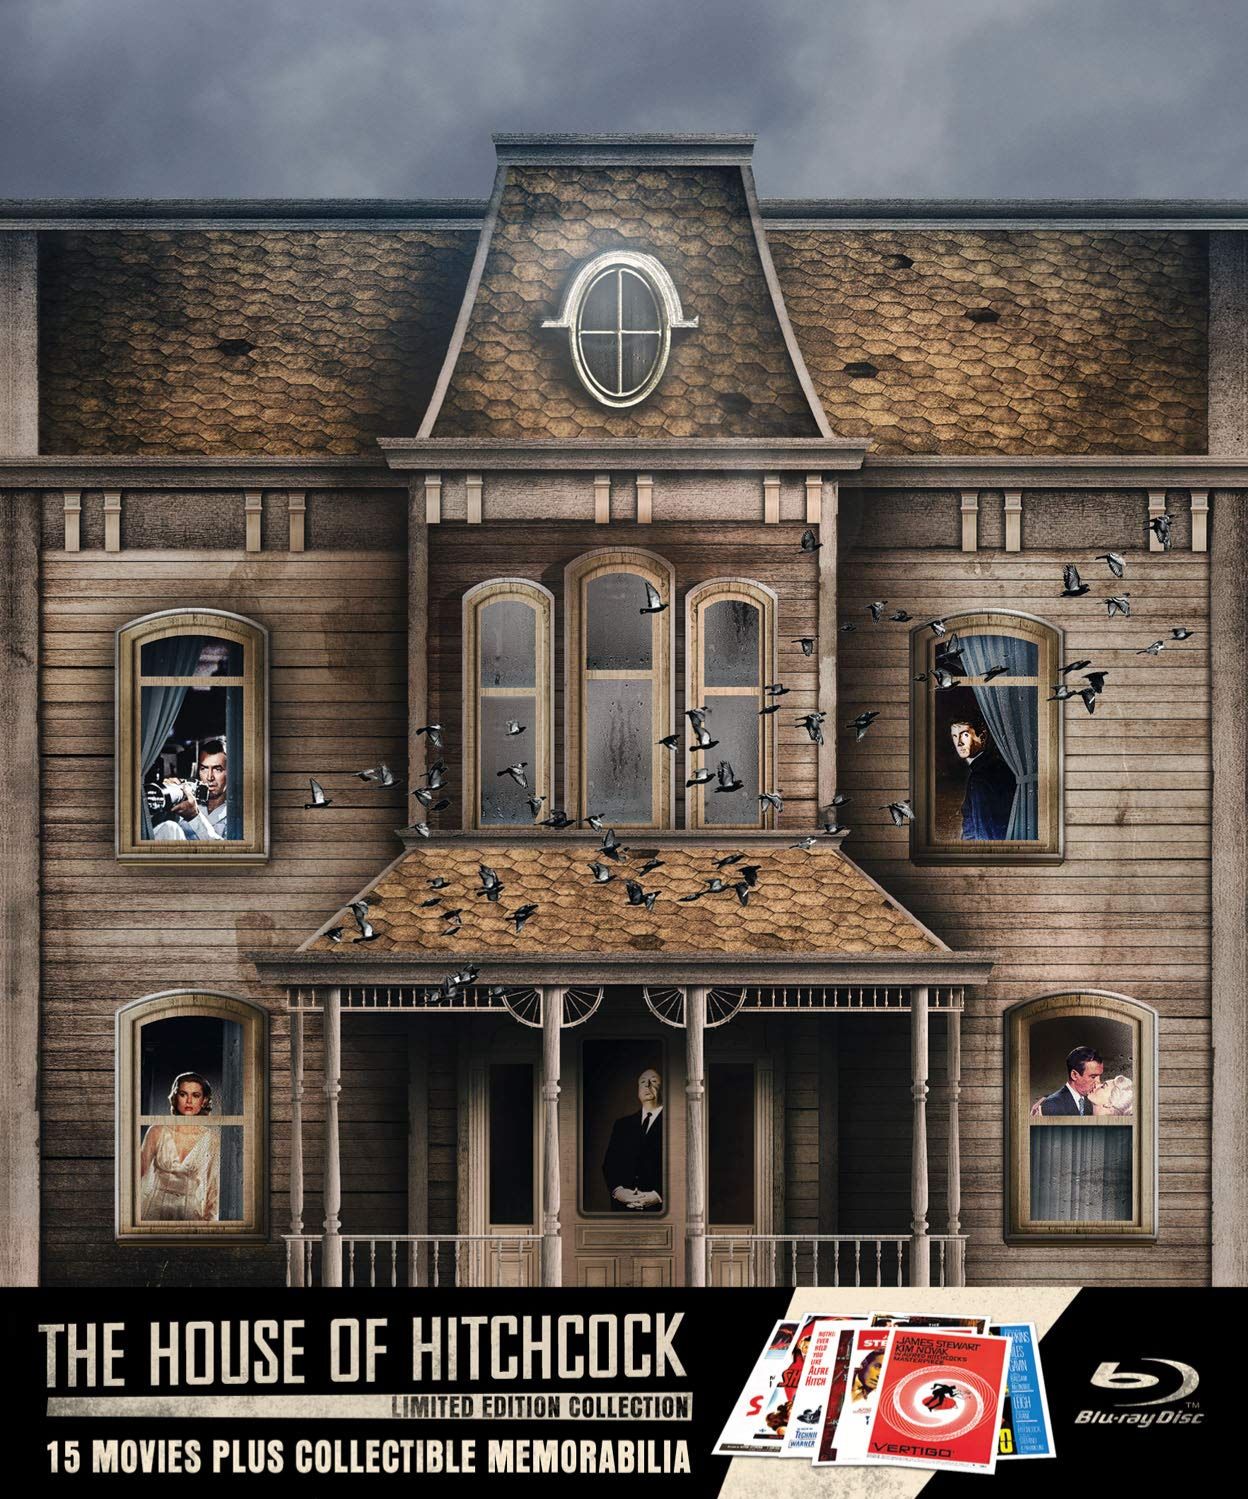 The House of Hitchcock blu-ray collection